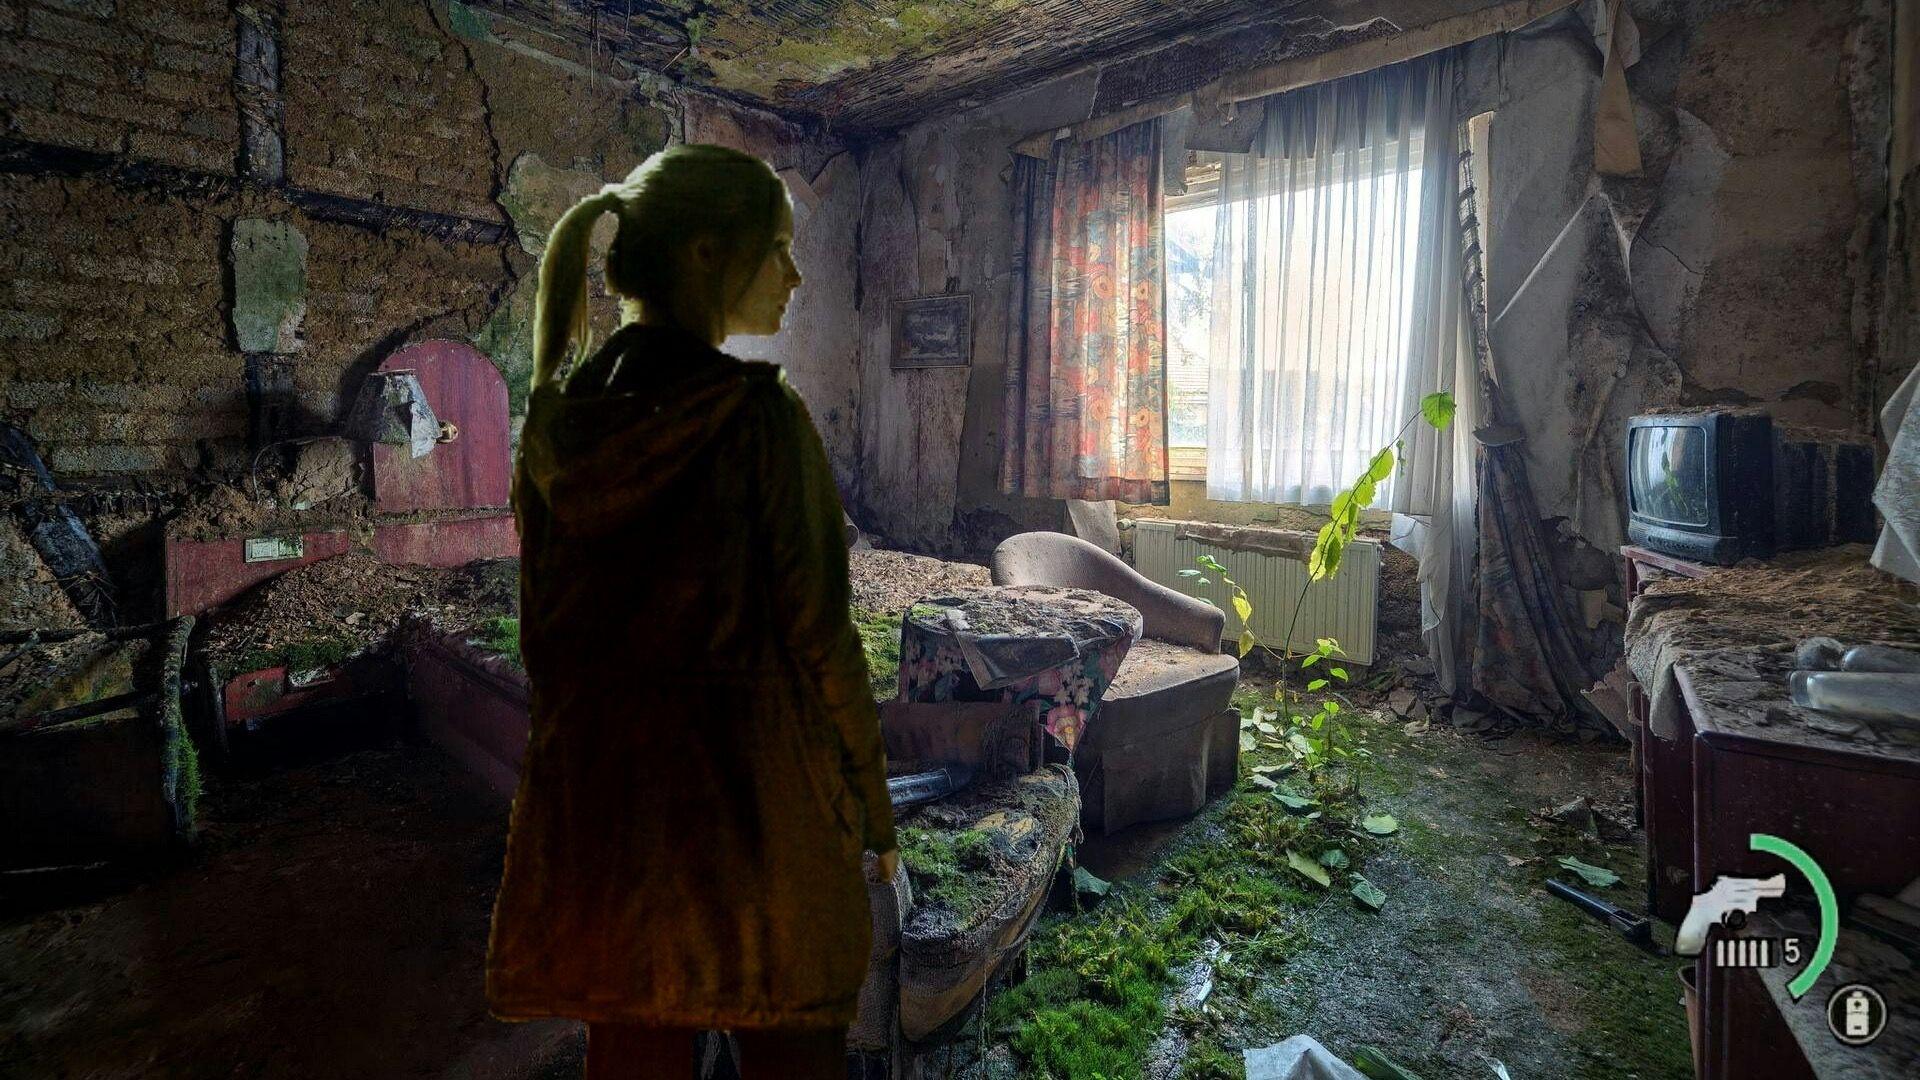 Another Look at how The Last of Us 2 should look like